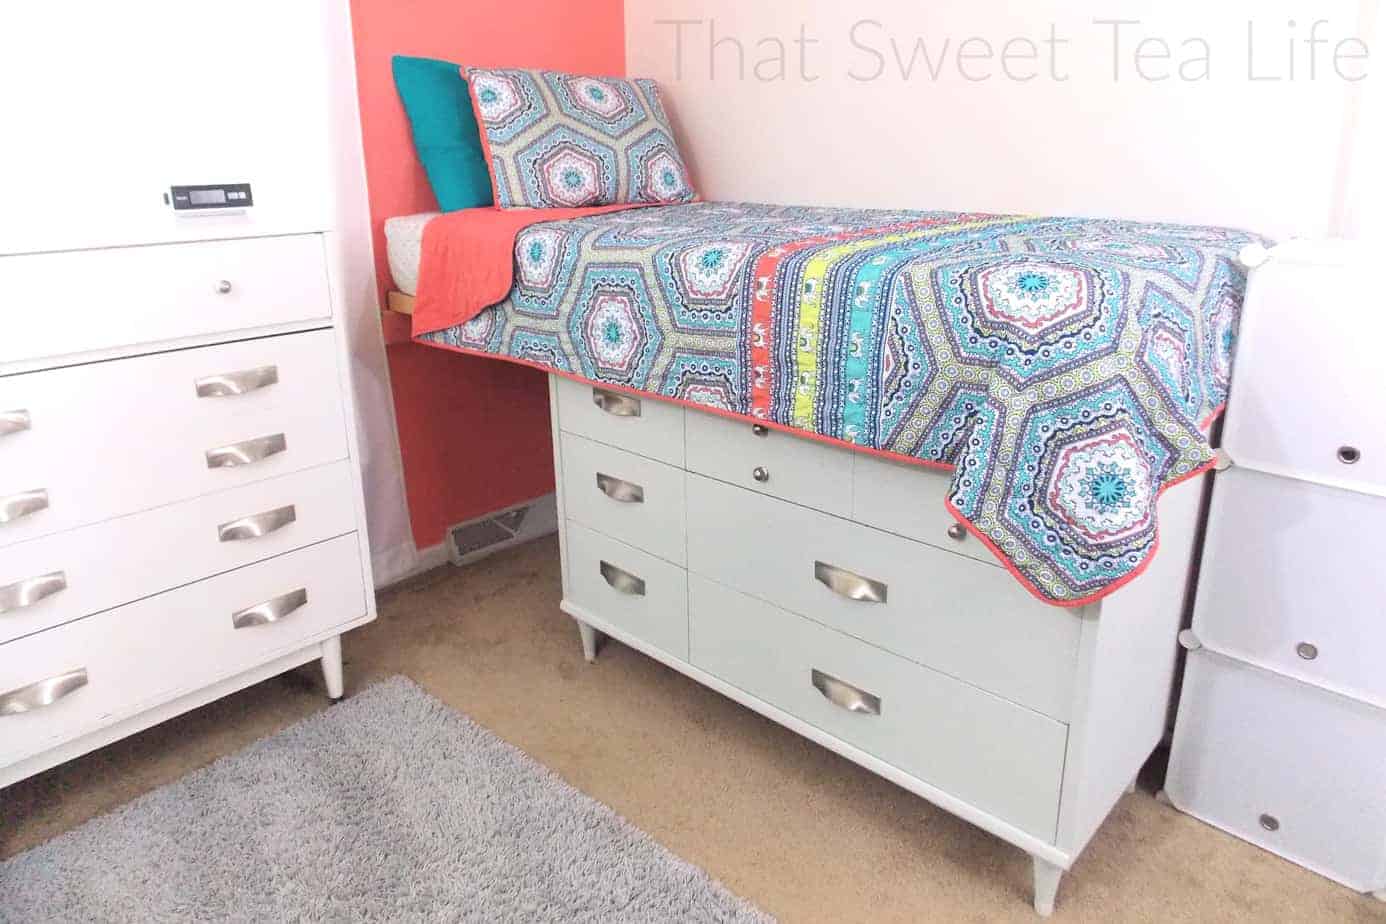 How To Make Beds With Storage, Bed Frame With Drawers Underneath Twin